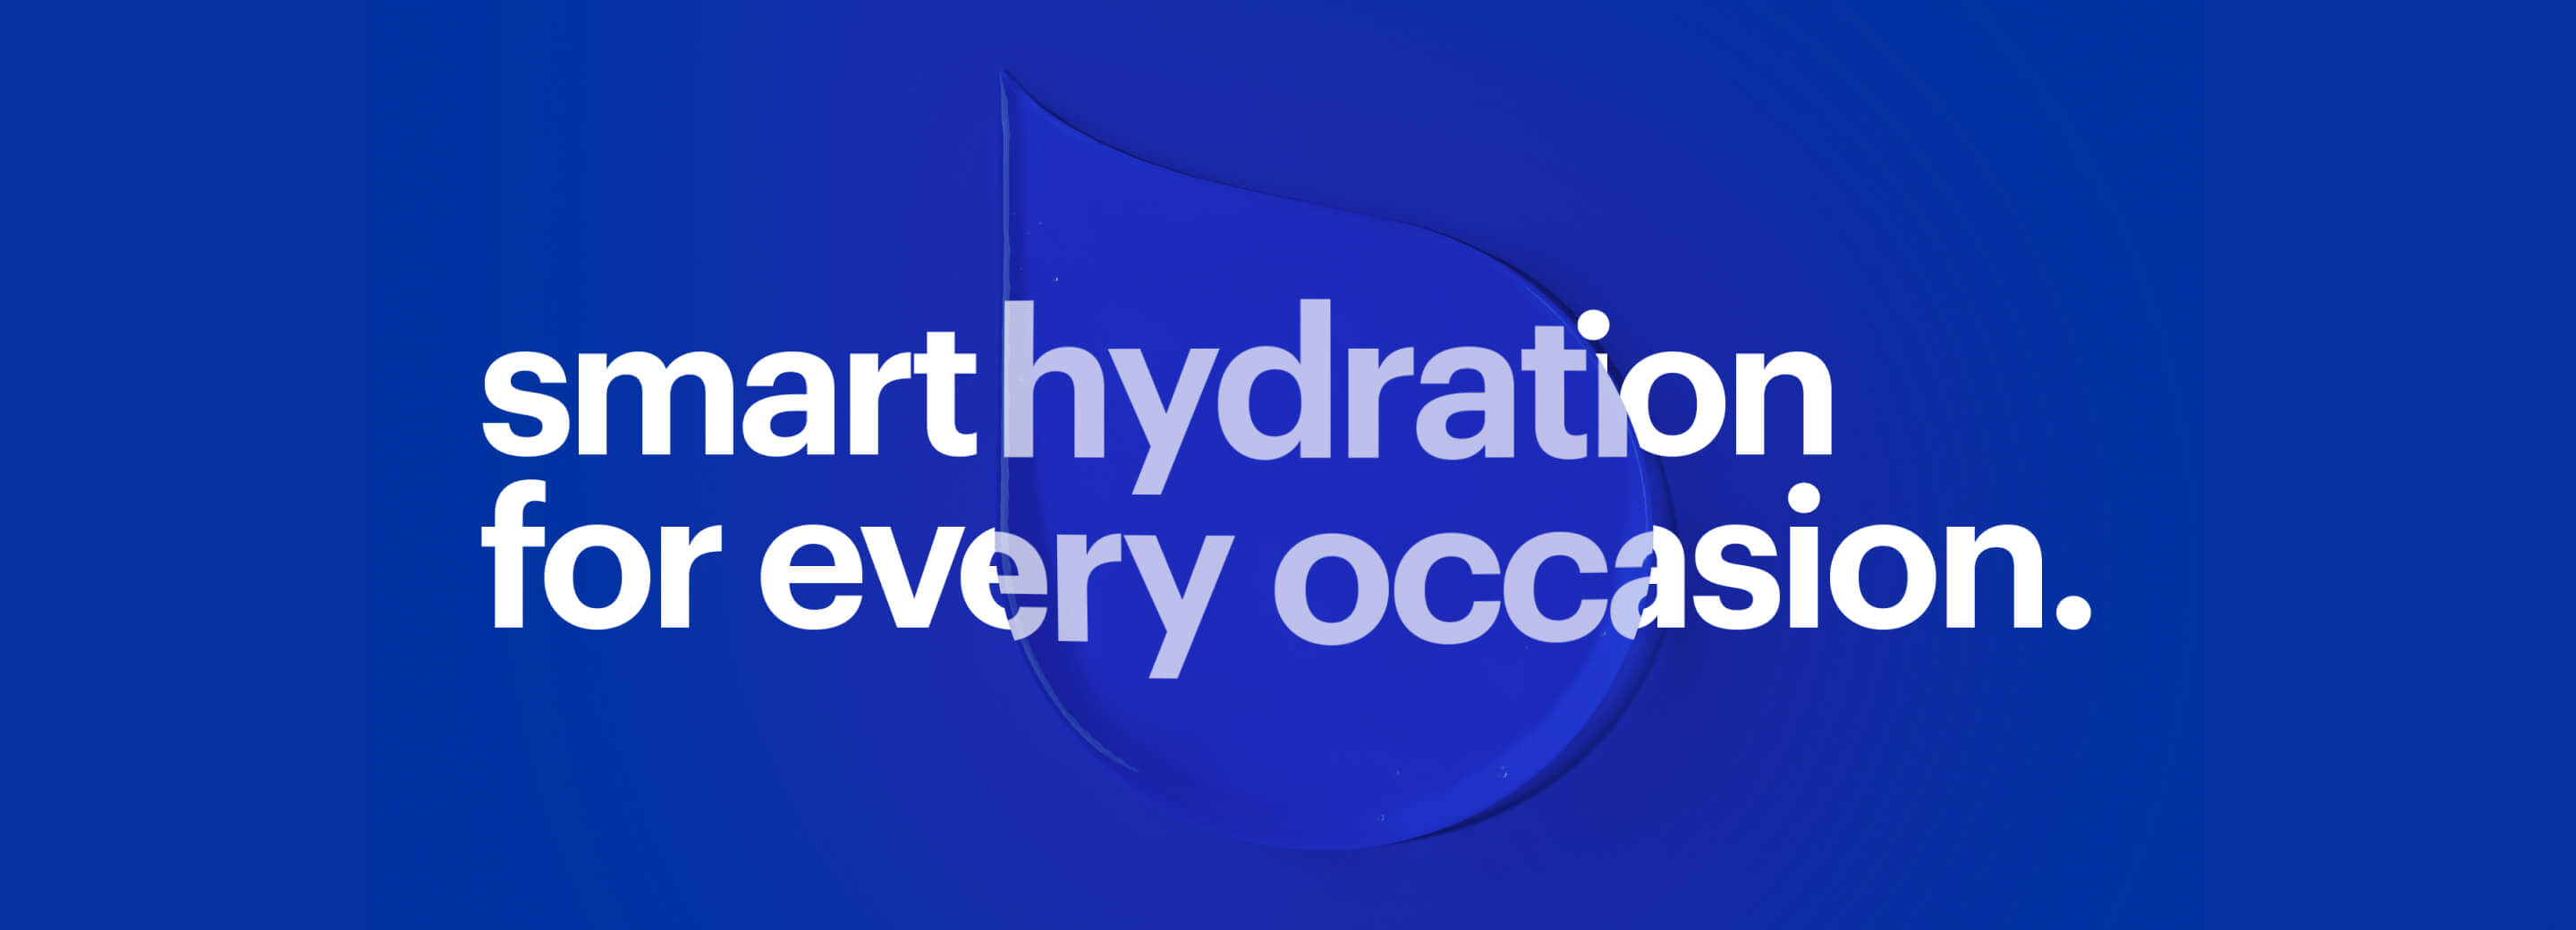 smart hydration for every occasion.